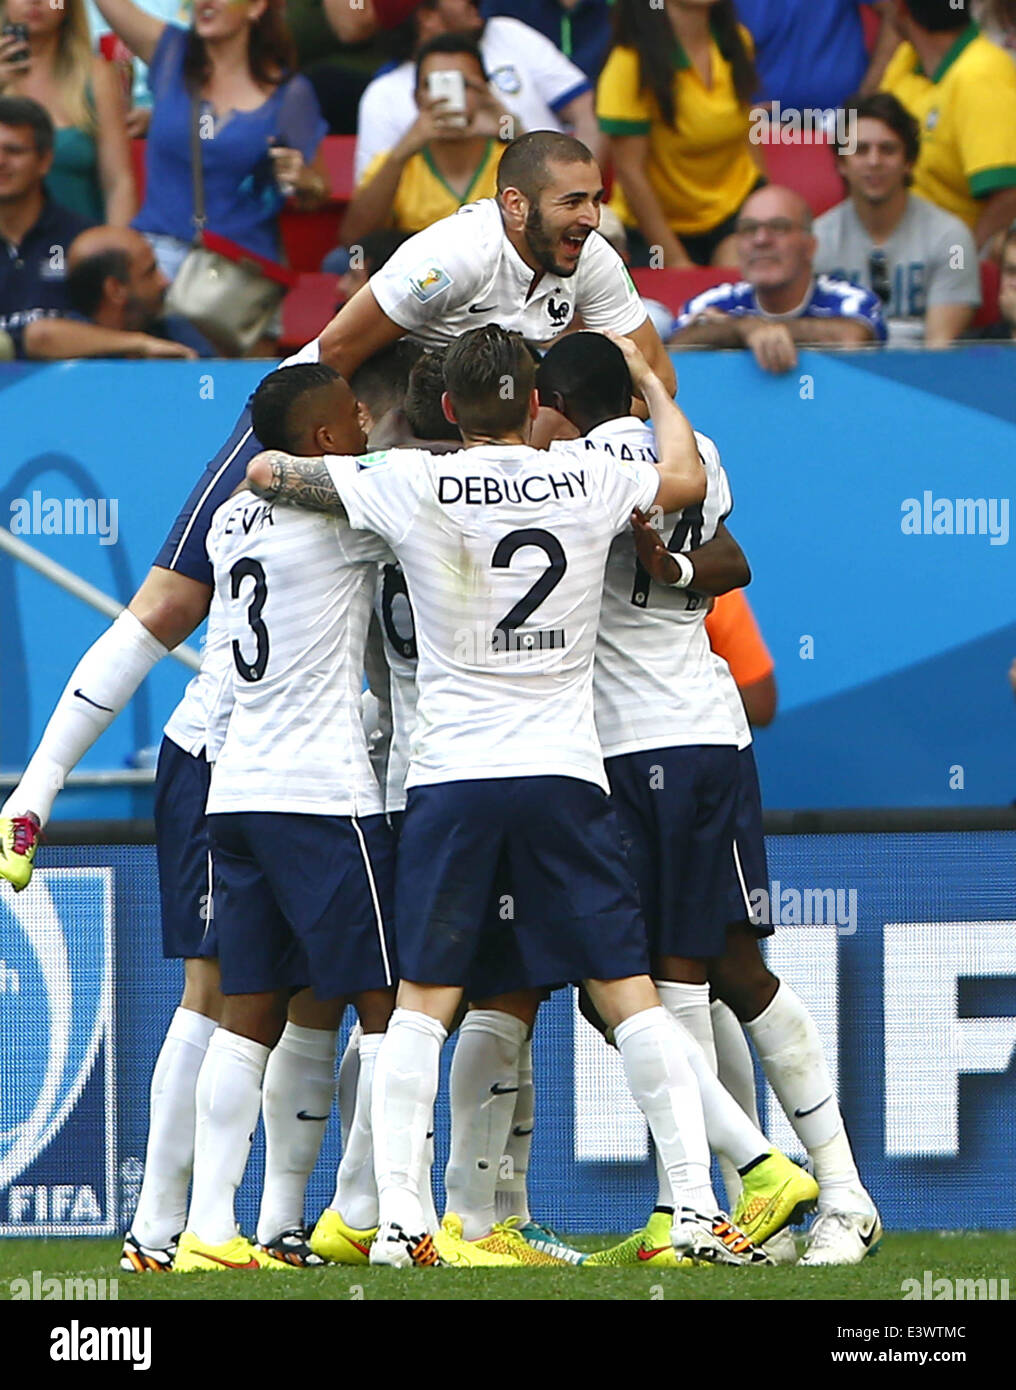 Brasilia, Brazil. 30th June, 2014. France's players celebrate the goal during a Round of 16 match between France and Nigeria of 2014 FIFA World Cup at the Estadio Nacional Stadium in Brasilia, Brazil, on June 30, 2014. Credit:  Liu Bin/Xinhua/Alamy Live News Stock Photo